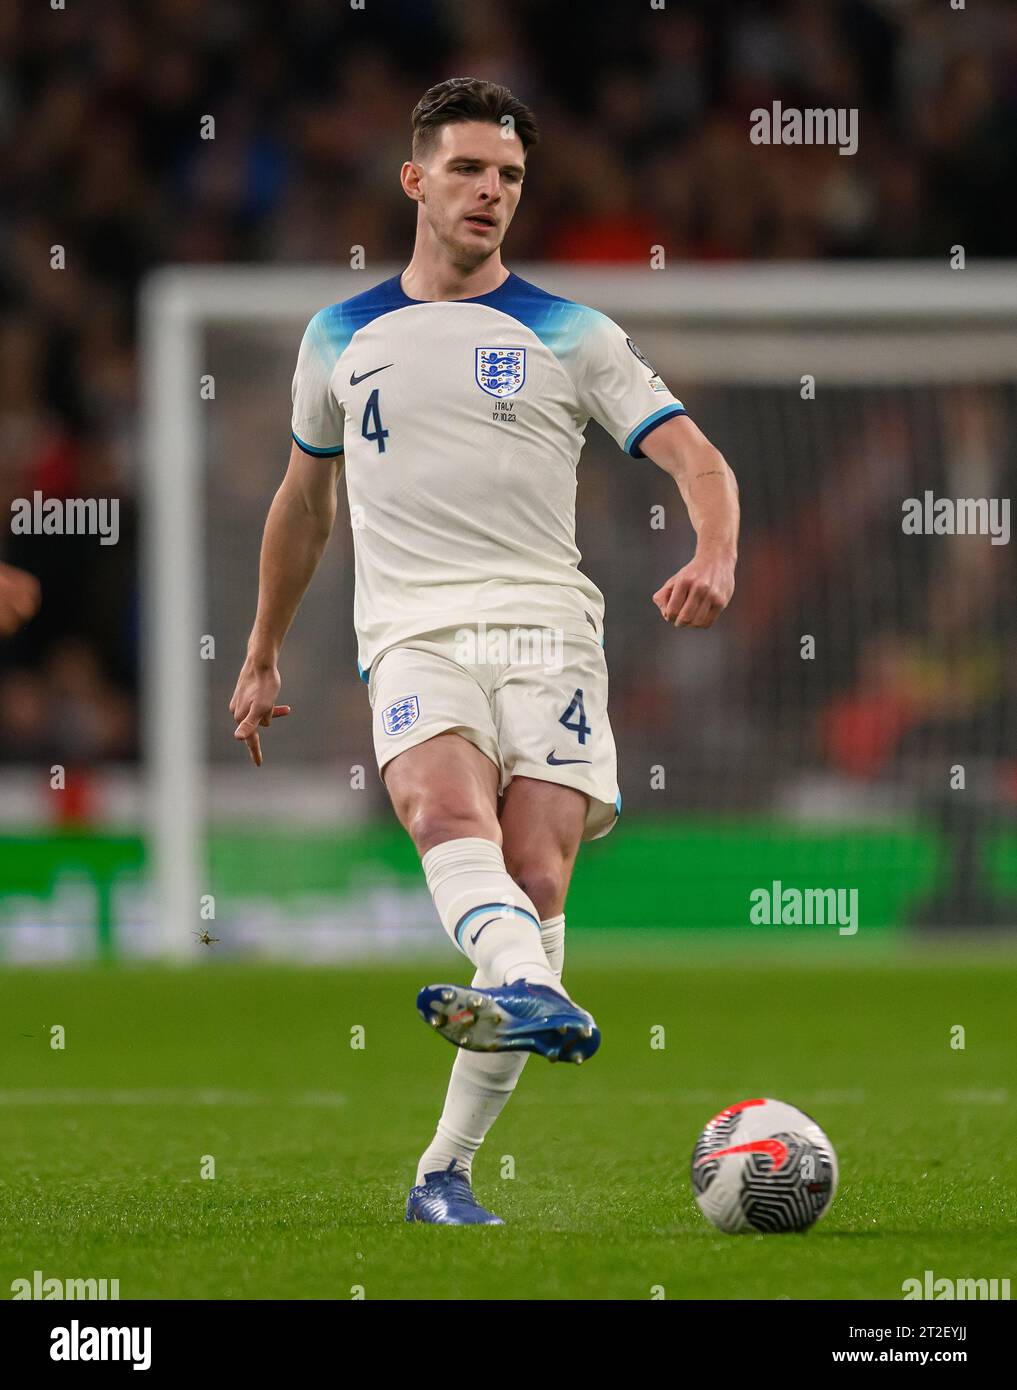 17 Oct 2023 - England v Italy - Euro 2024 Qualifier - Wembley Stadium.  England's Declan Rice during the match against Italy. Picture : Mark Pain / Alamy Live News Stock Photo